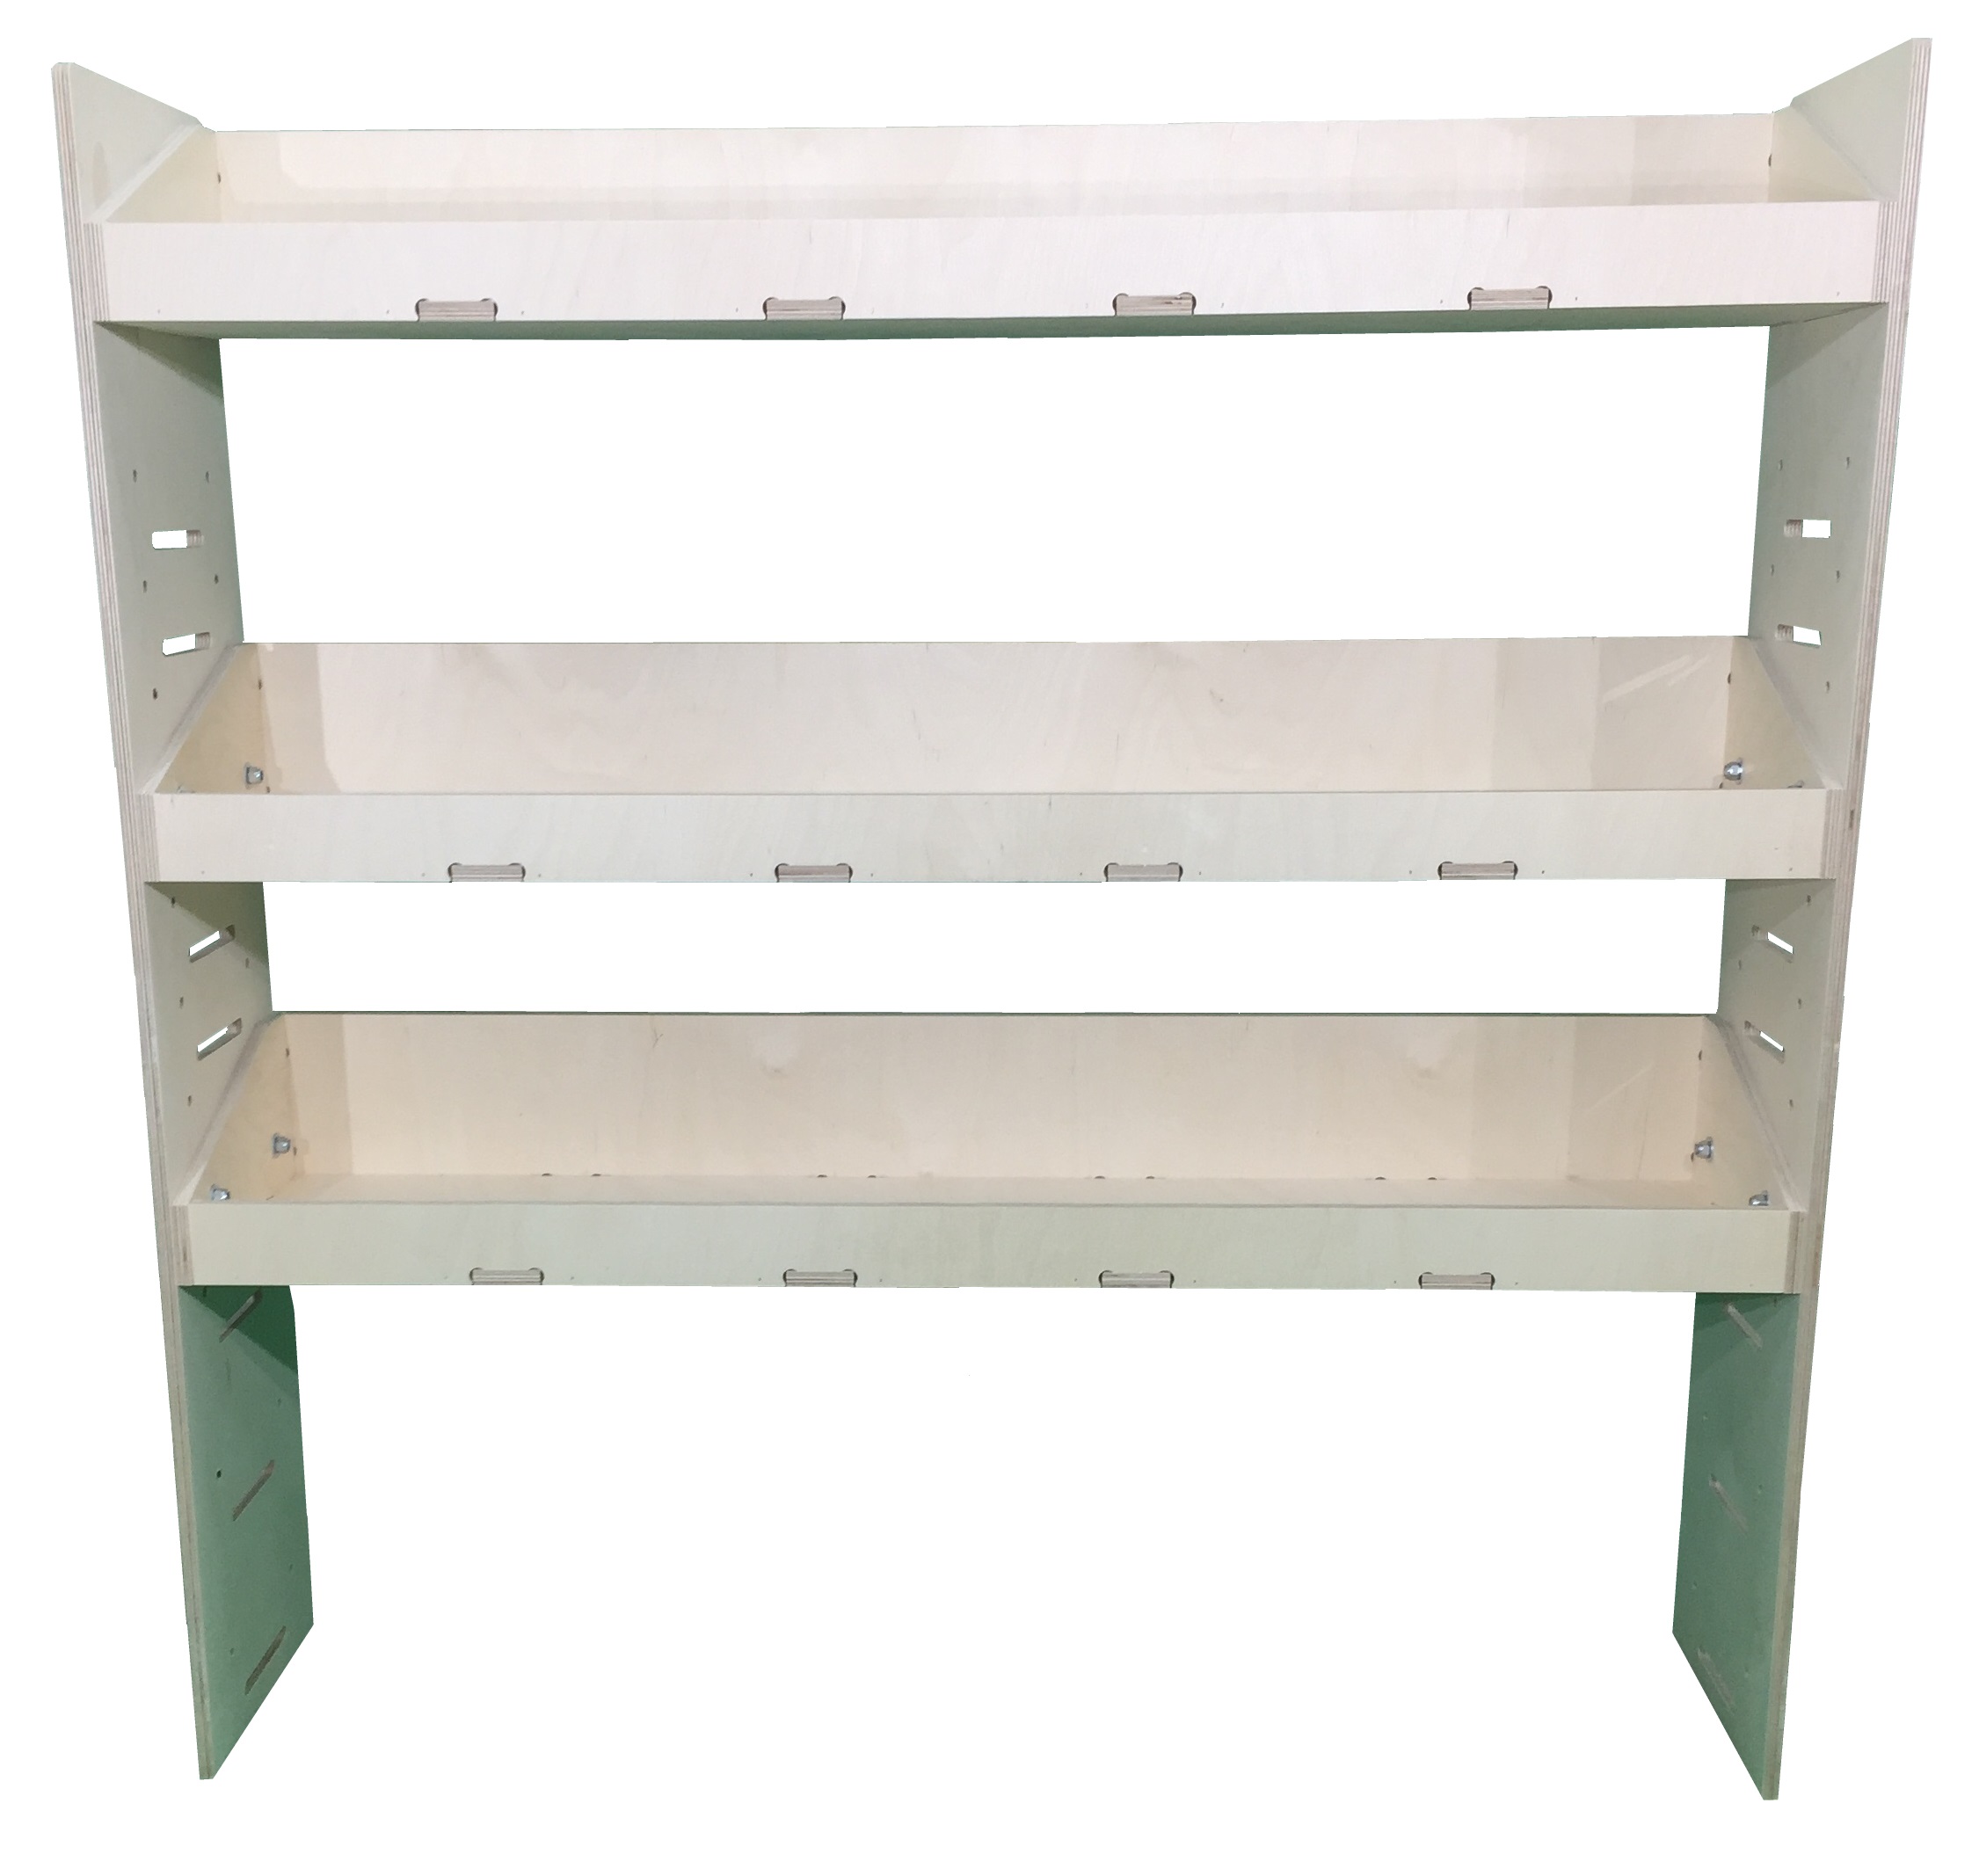 Van Plywood Shelving and Racking Storage System 1237mm(H) x 1200mm(W) x 269mm(D) - BVR1212263